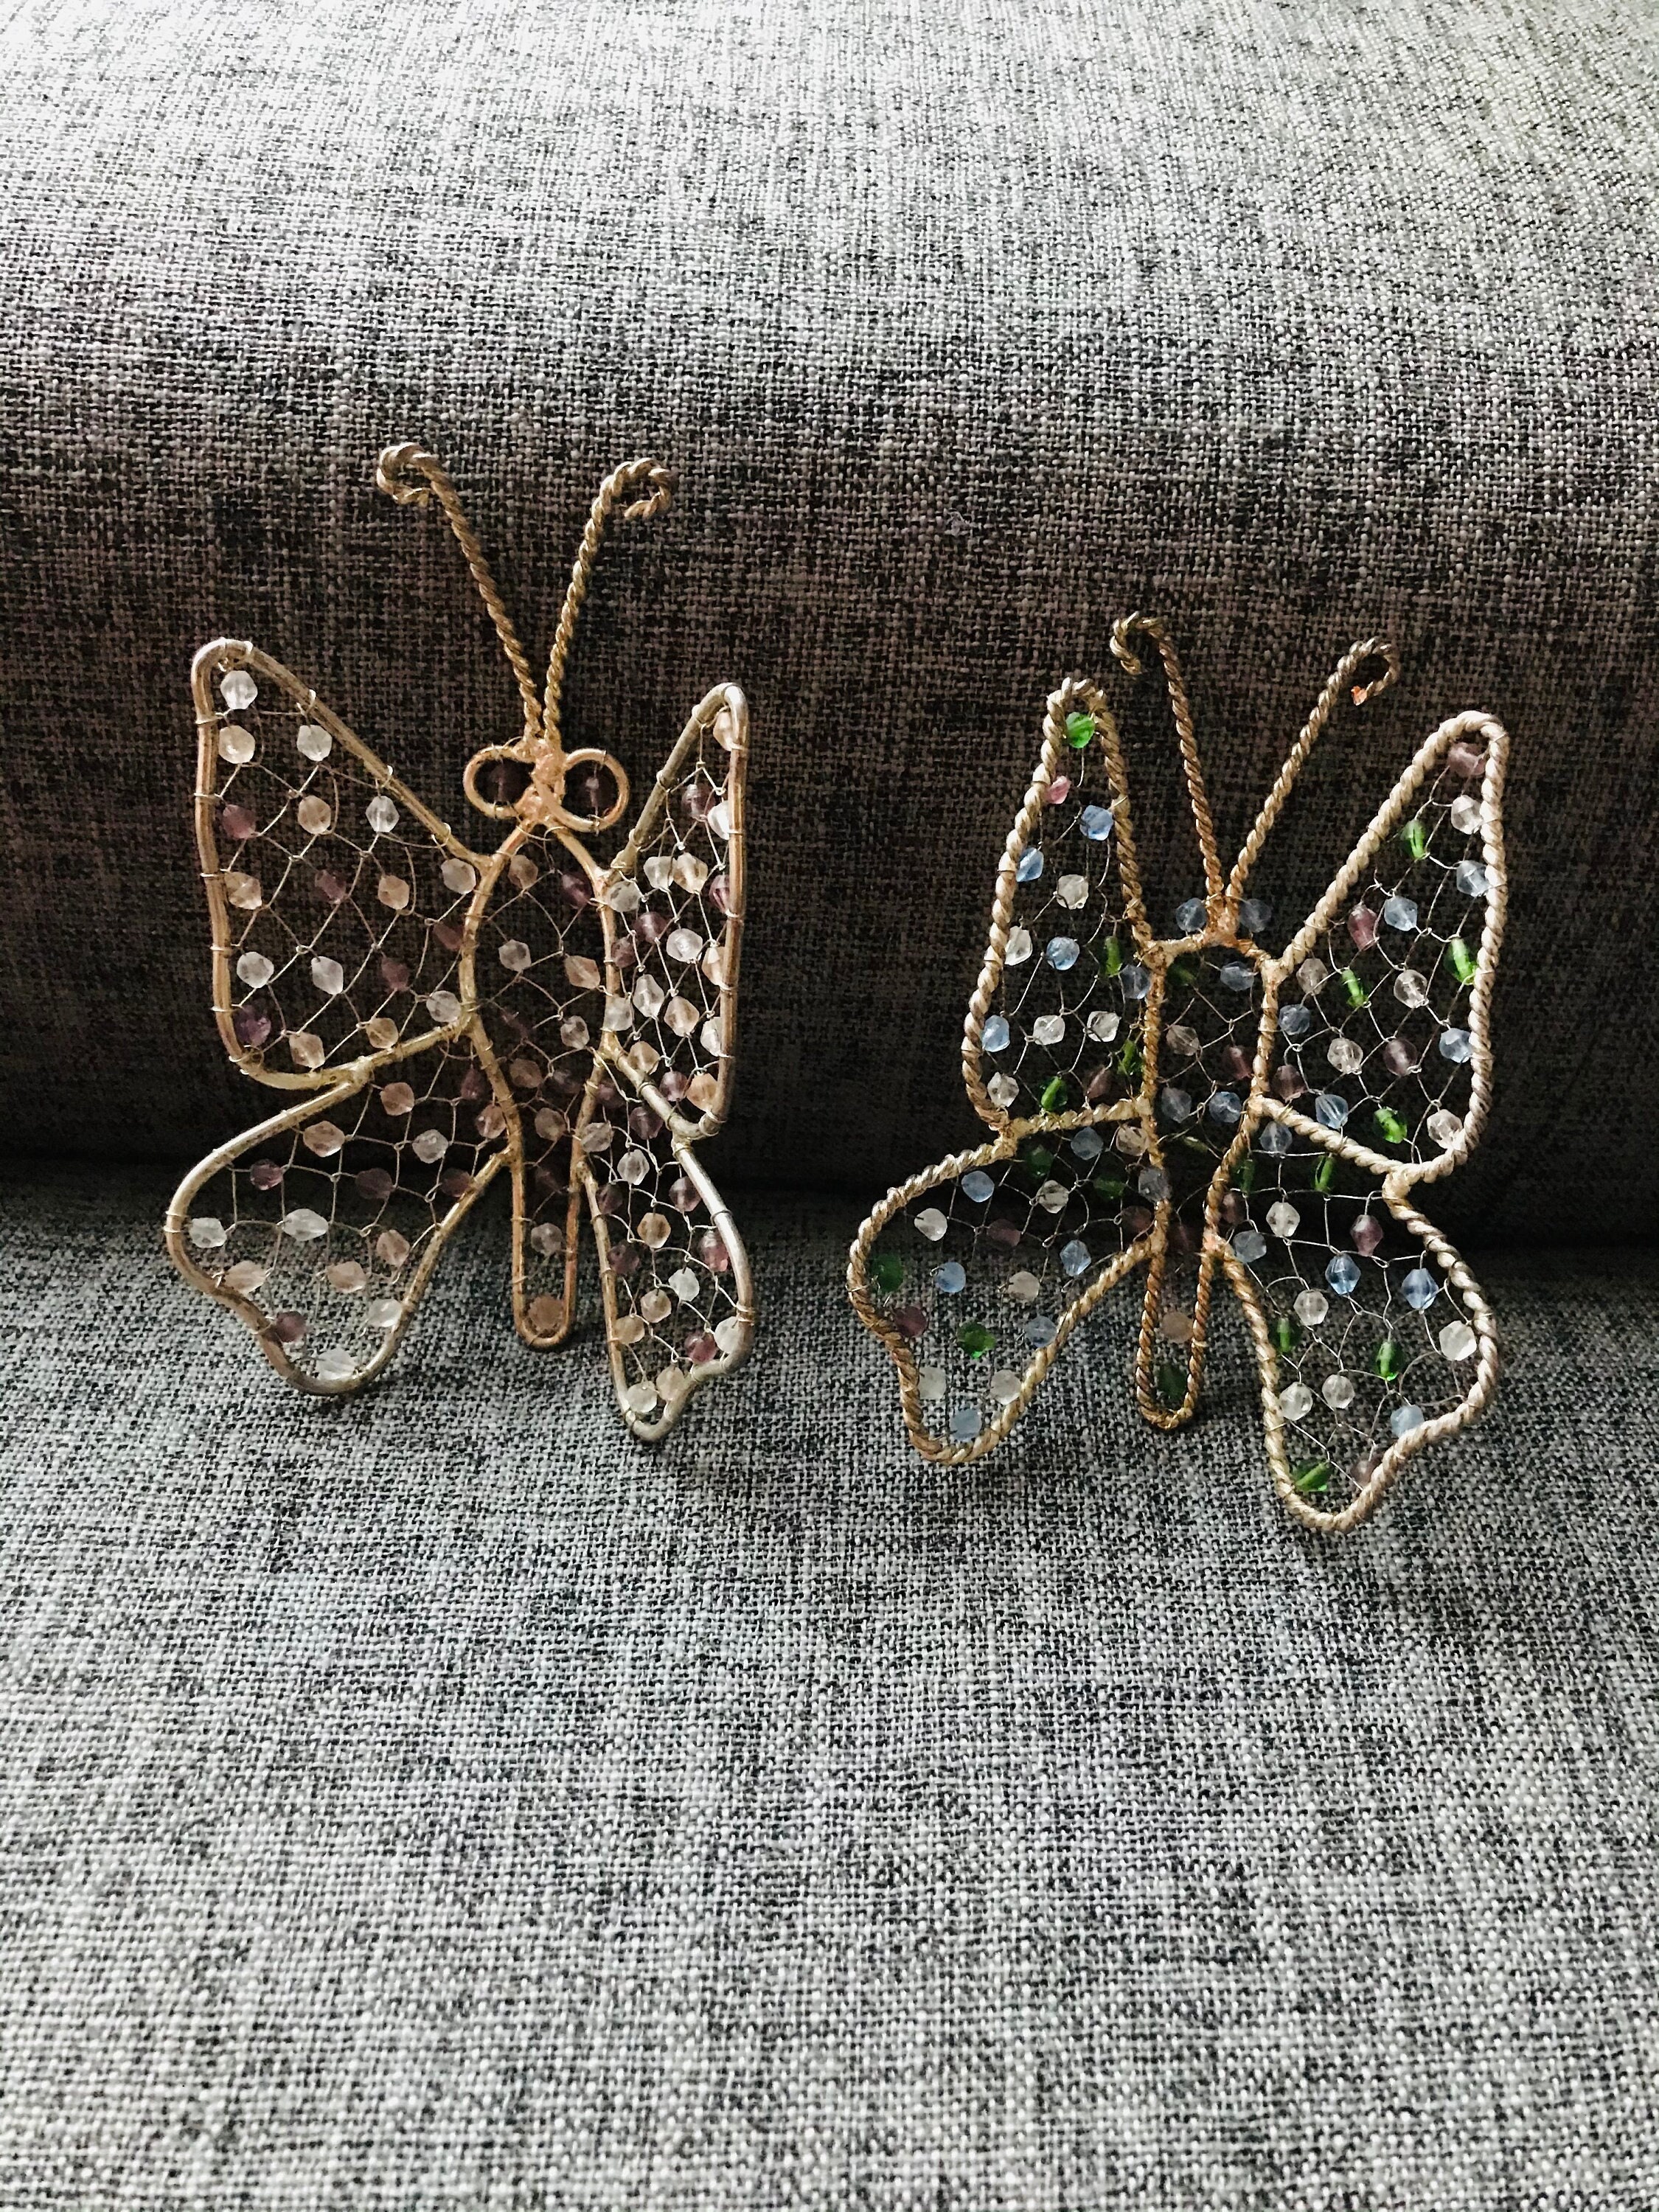 2 Decorative Butterflies-NEW WITH GLASS BEADS-CLIPS 